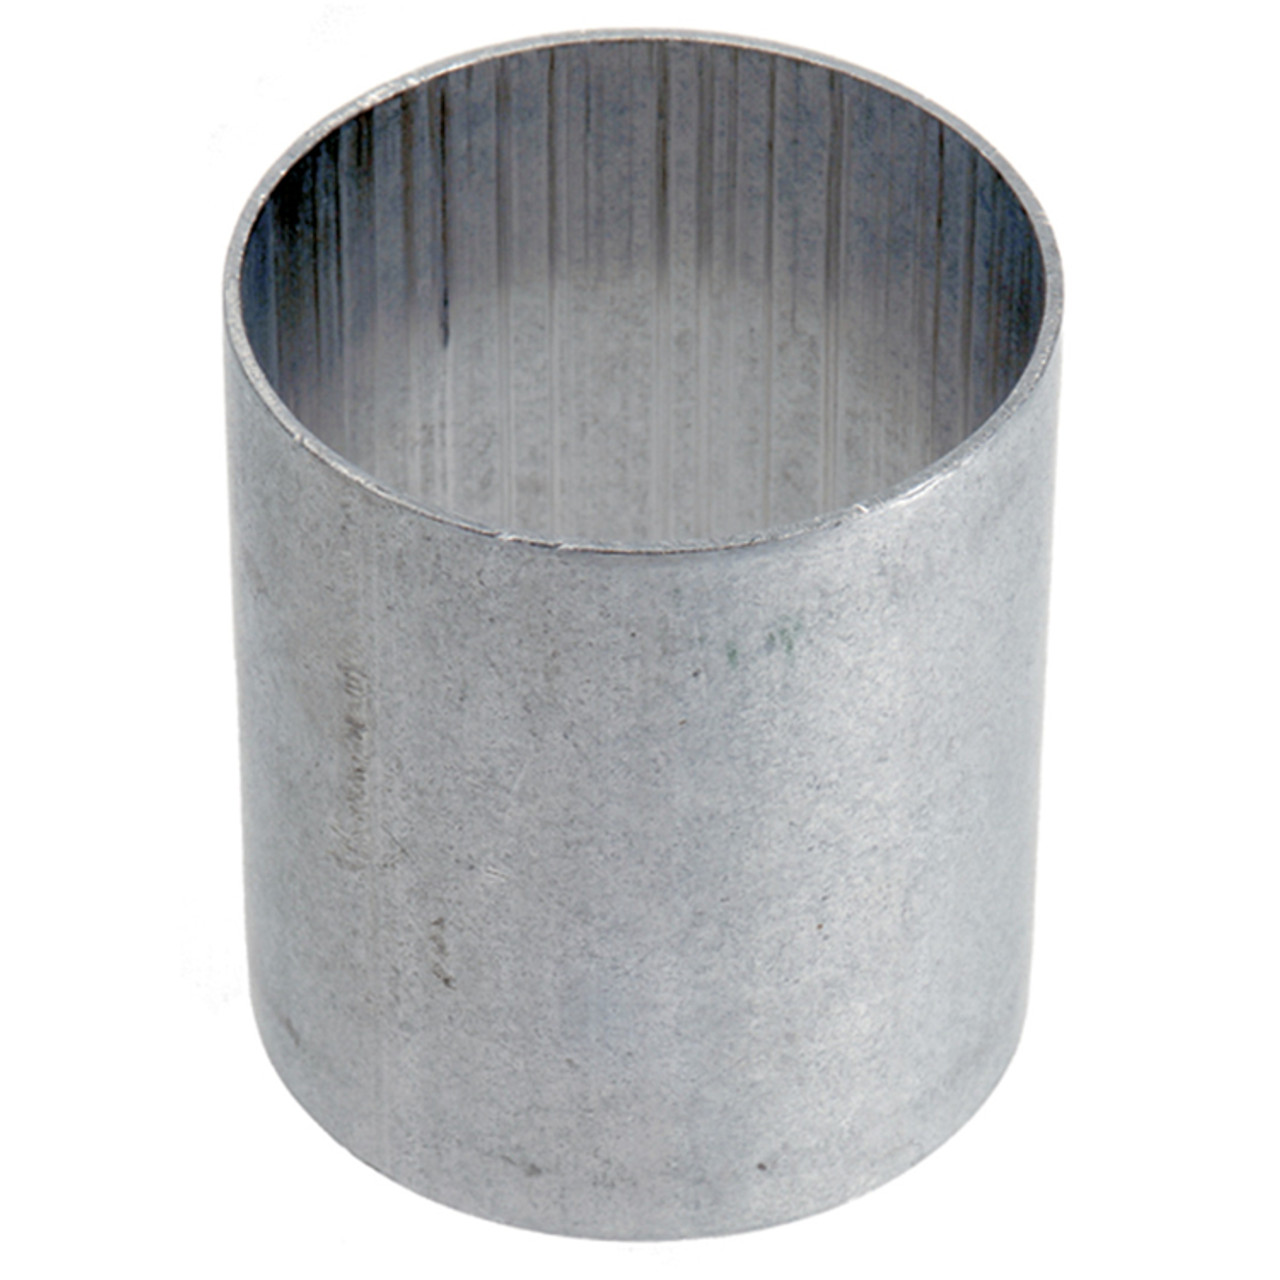 1.75" Stainless Steel Hose Sleeve   G3SS-175